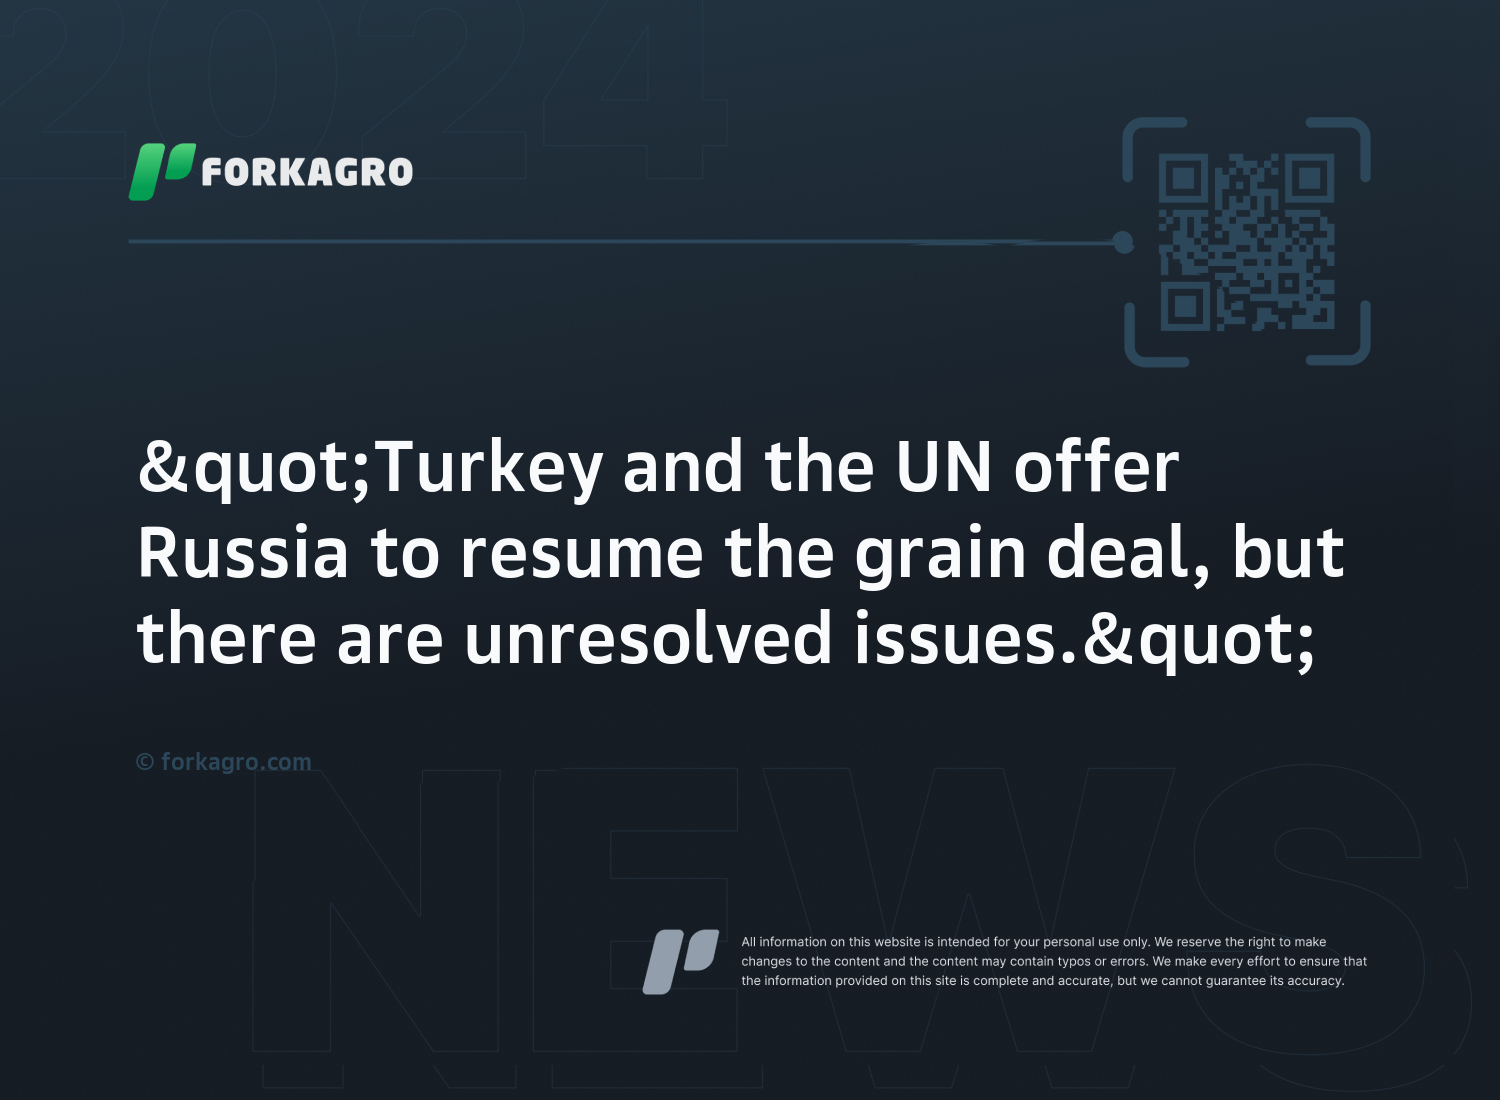 "Turkey and the UN offer Russia to resume the grain deal, but there are unresolved issues."